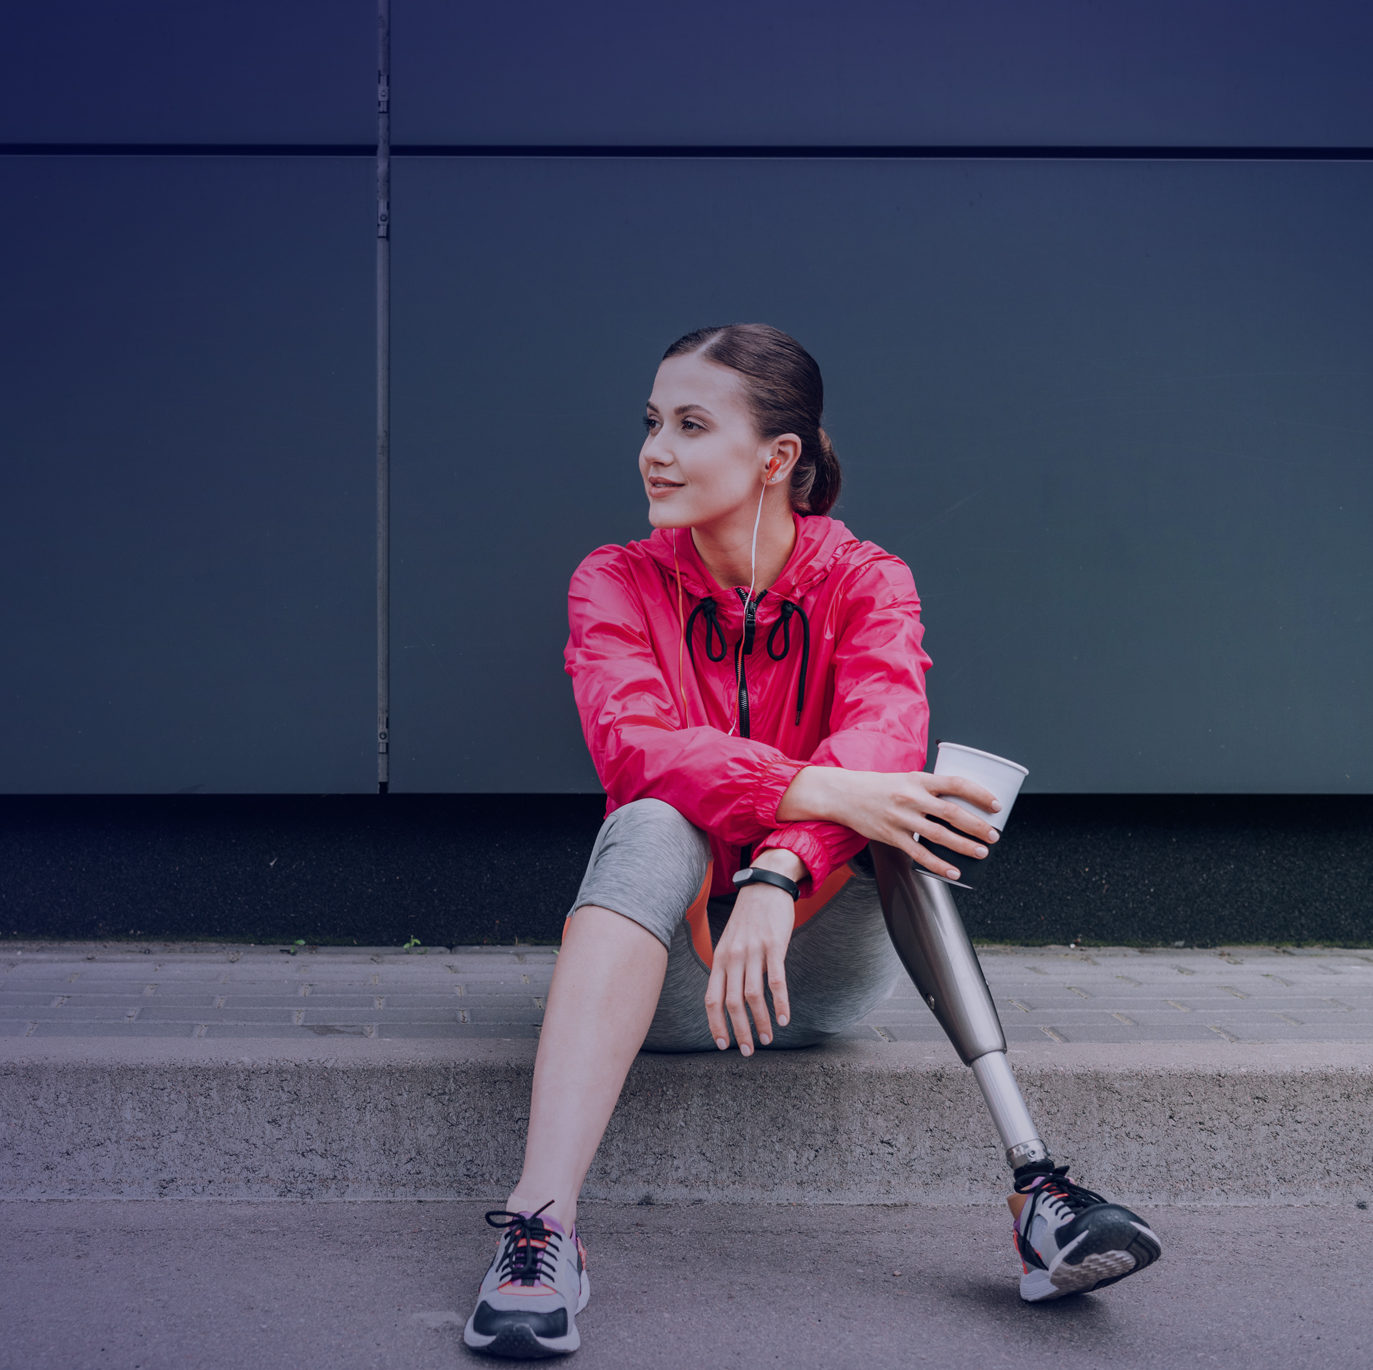 woman with prosthetic limb sitting down